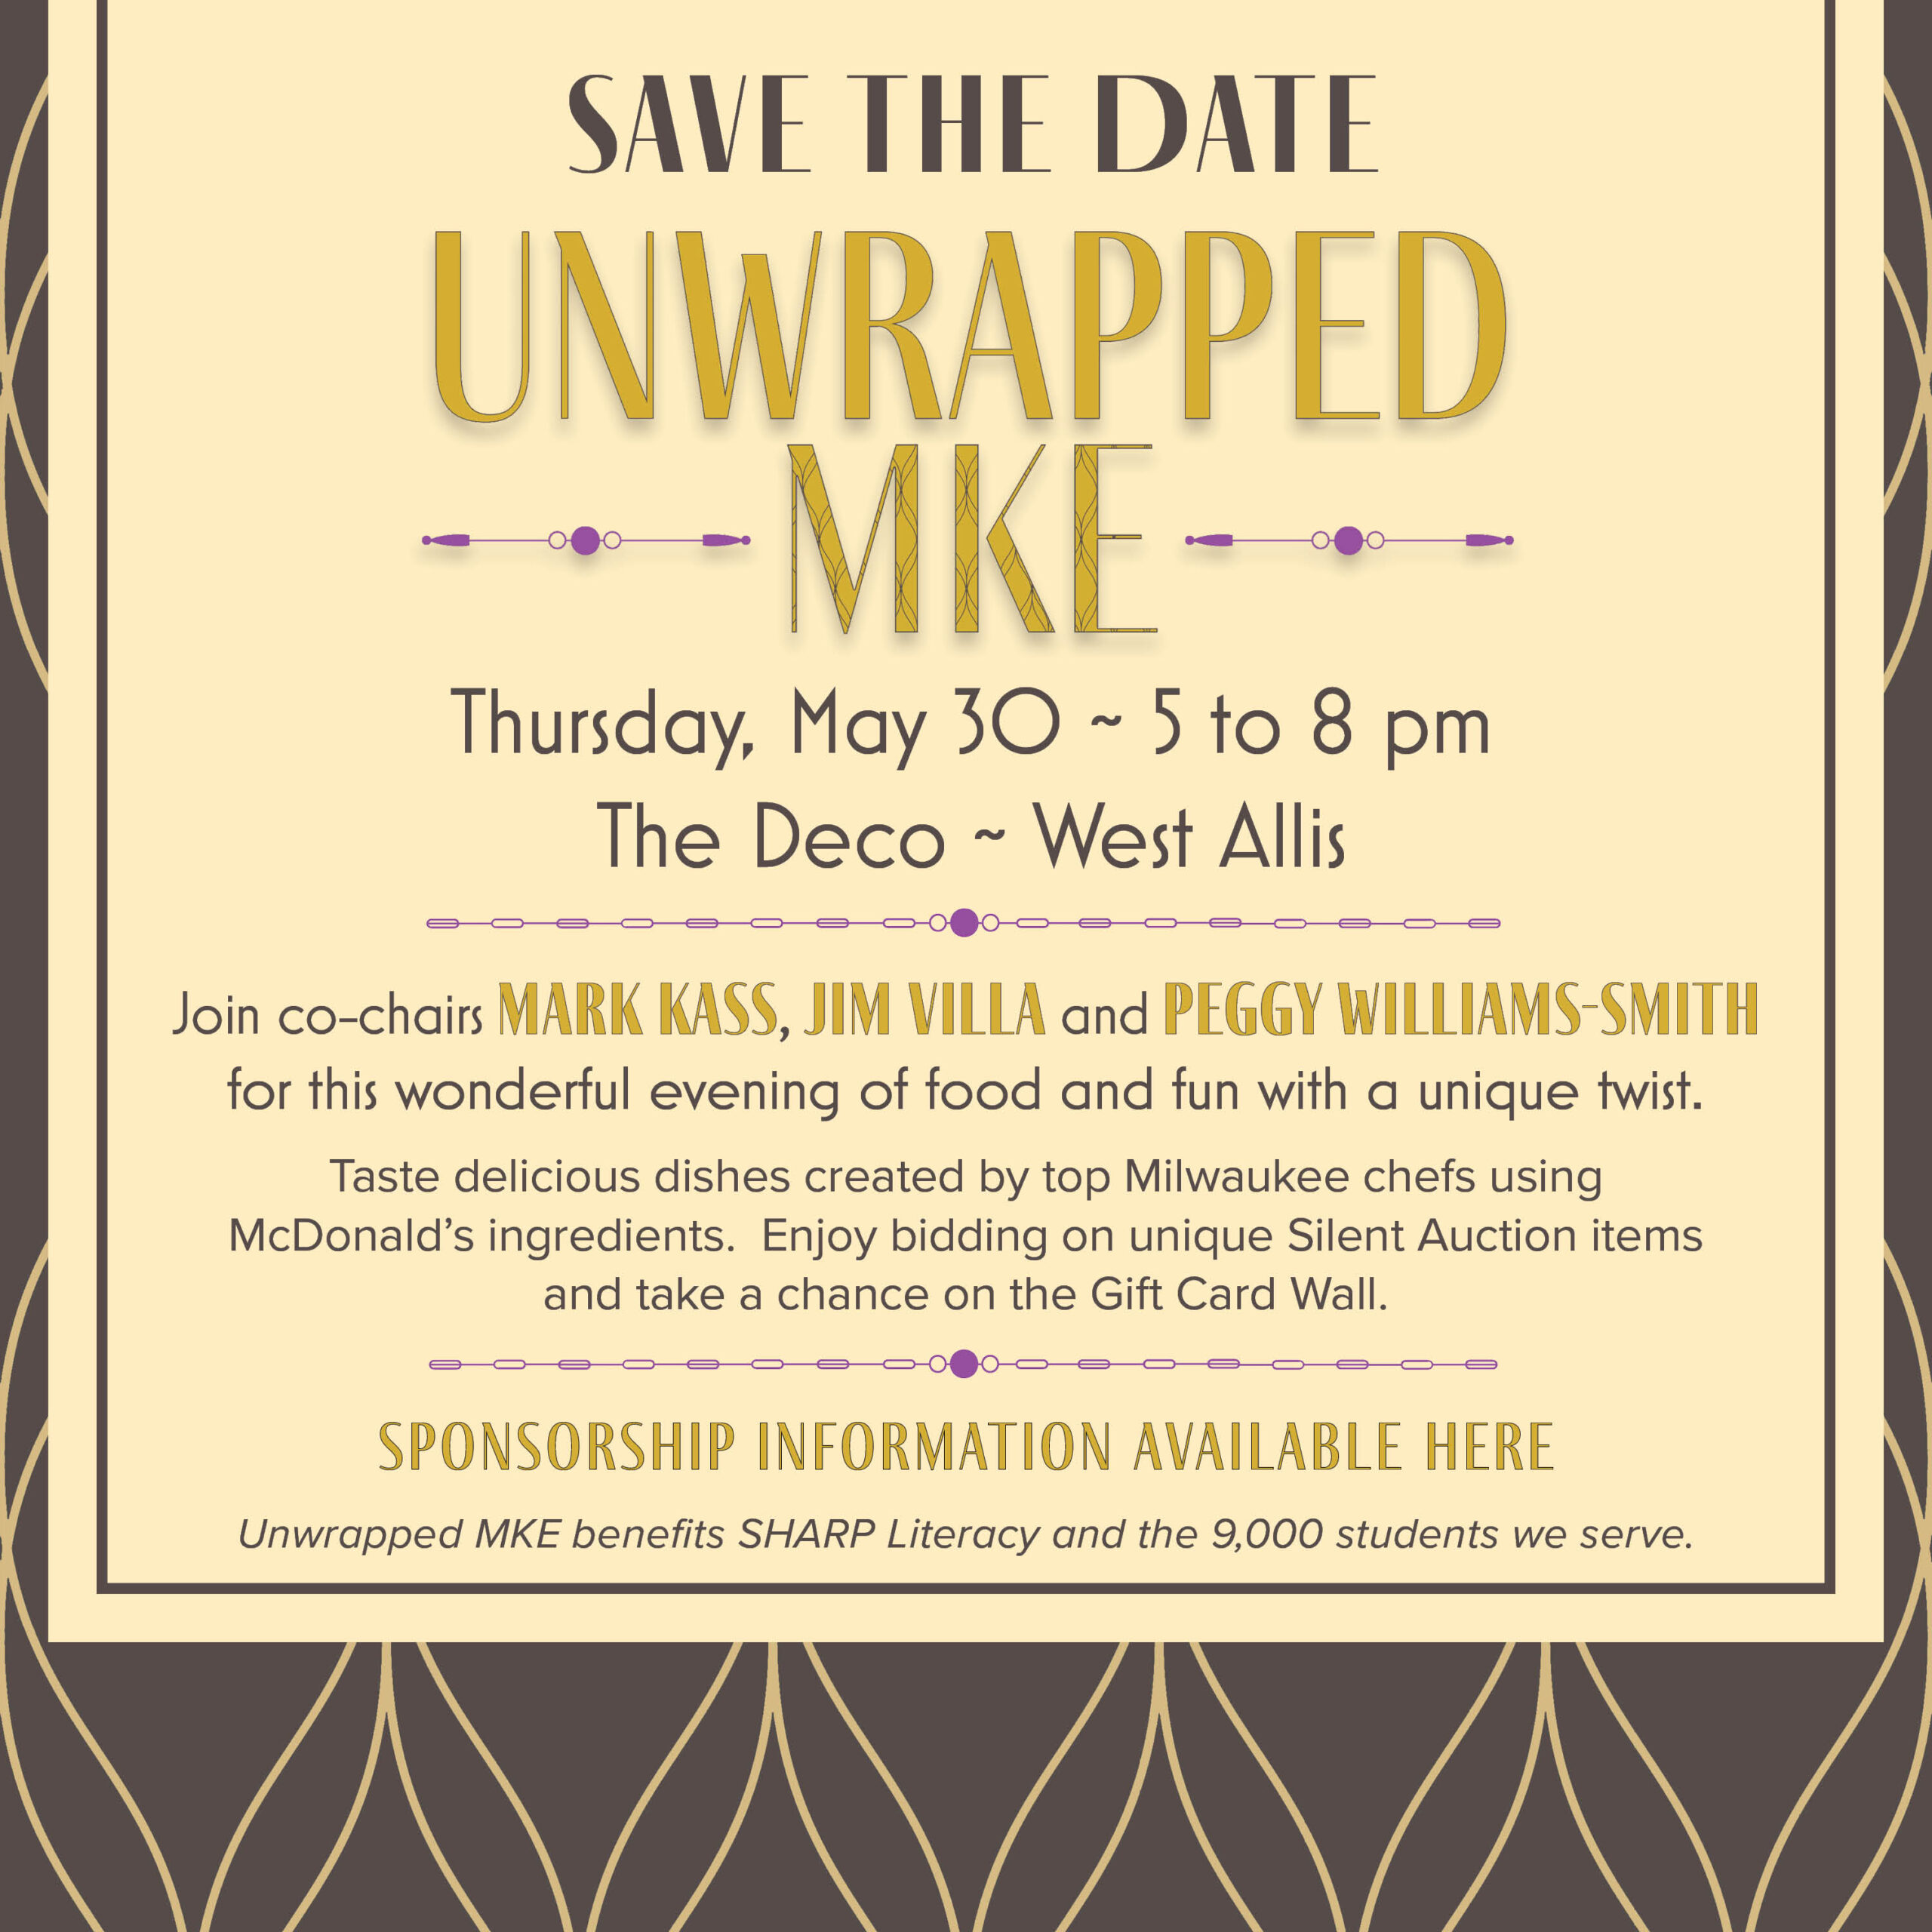 Support SHARP Literacy's Unwrapped MKE